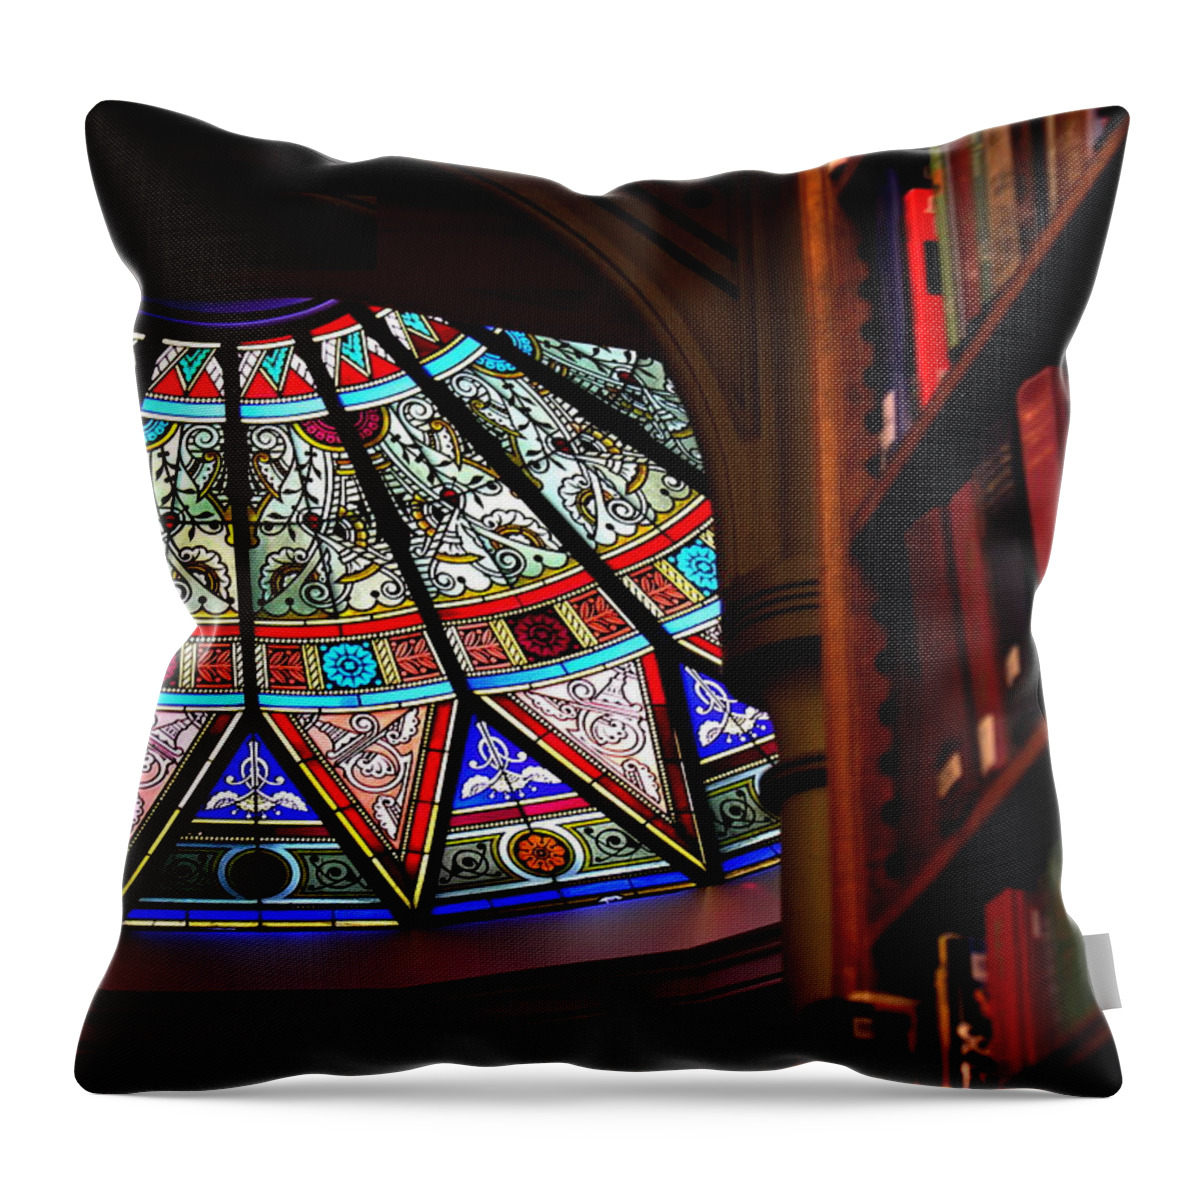 Lehigh University Throw Pillow featuring the photograph Lehigh University Linderman Library Books by Jacqueline M Lewis